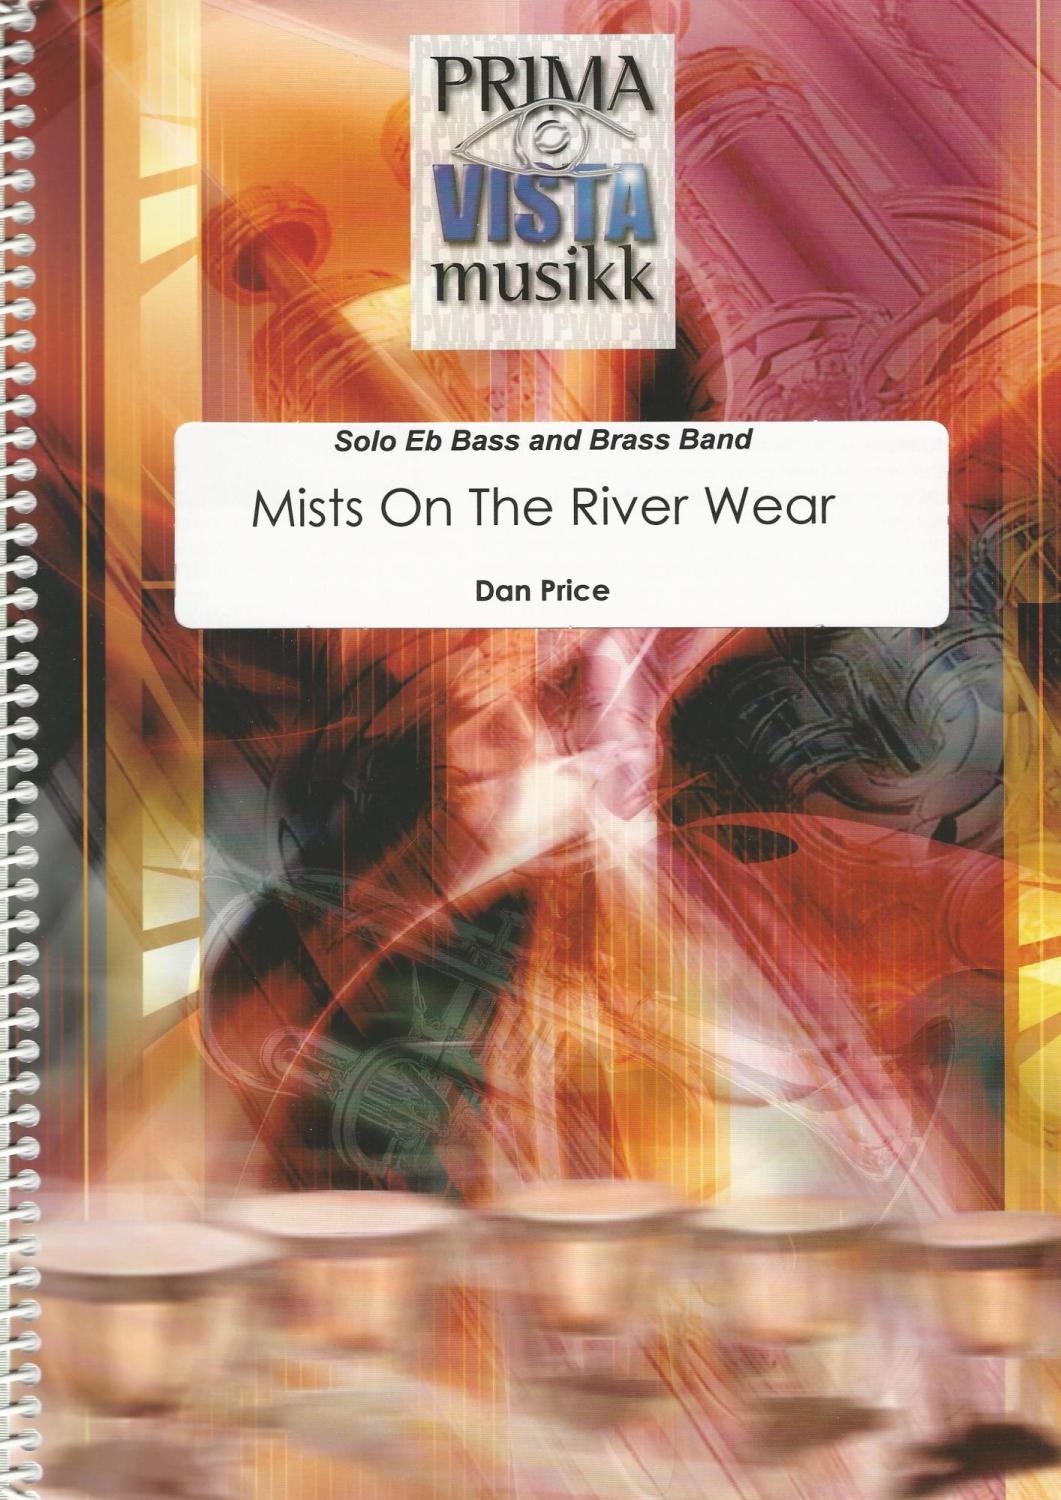 Mists on The River Wear for Solo Eb Bass and Brass Band - Dan Price